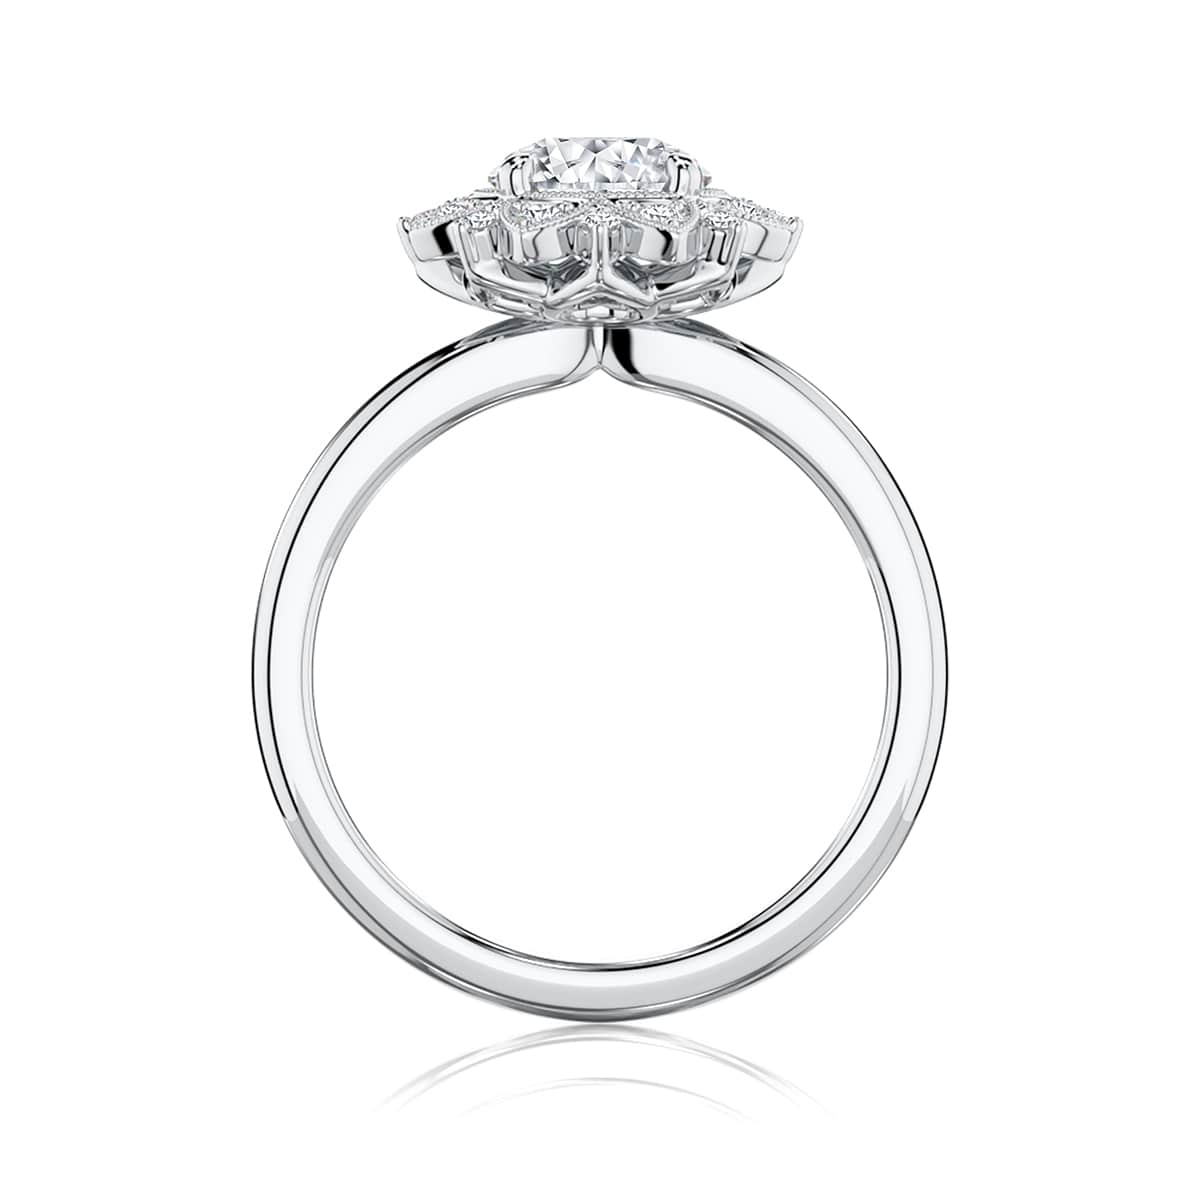 Marisol Round Diamond Engagement Ring in White Gold with Halo